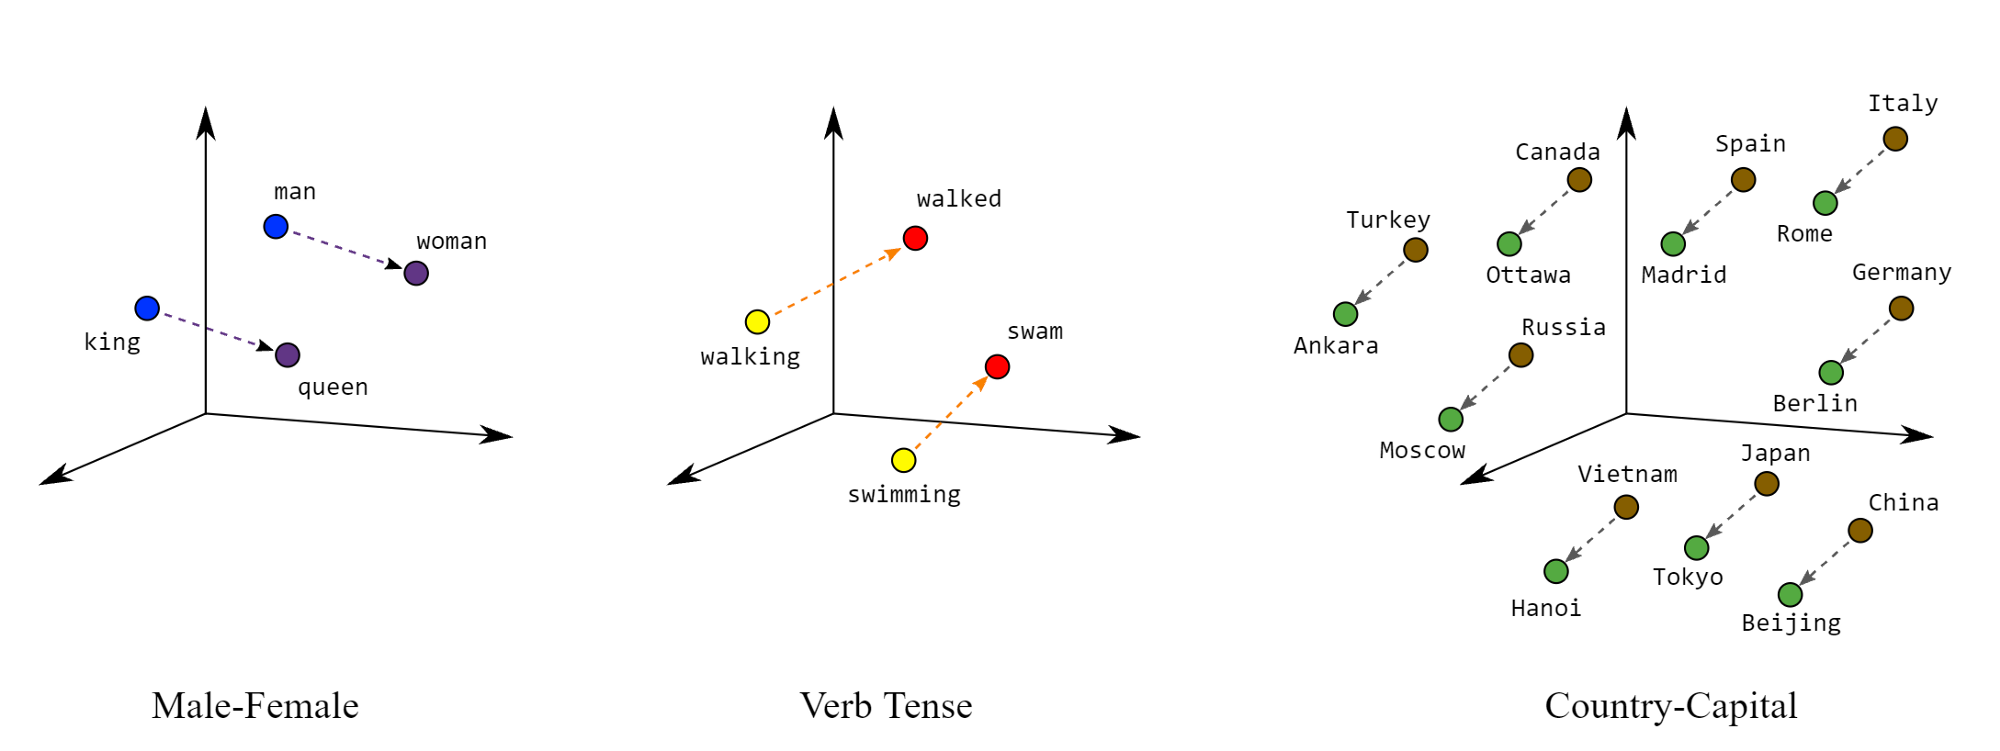 Position (distance and direction) in the vector space can encode semantics in a good embedding. For example, the following visualizations of real embeddings show geometrical relationships that capture semantic relations like the relation between a country and its capital. This sort of meaningful space gives your machine learning system opportunities to detect patterns that may help with the learning task. Source: Google